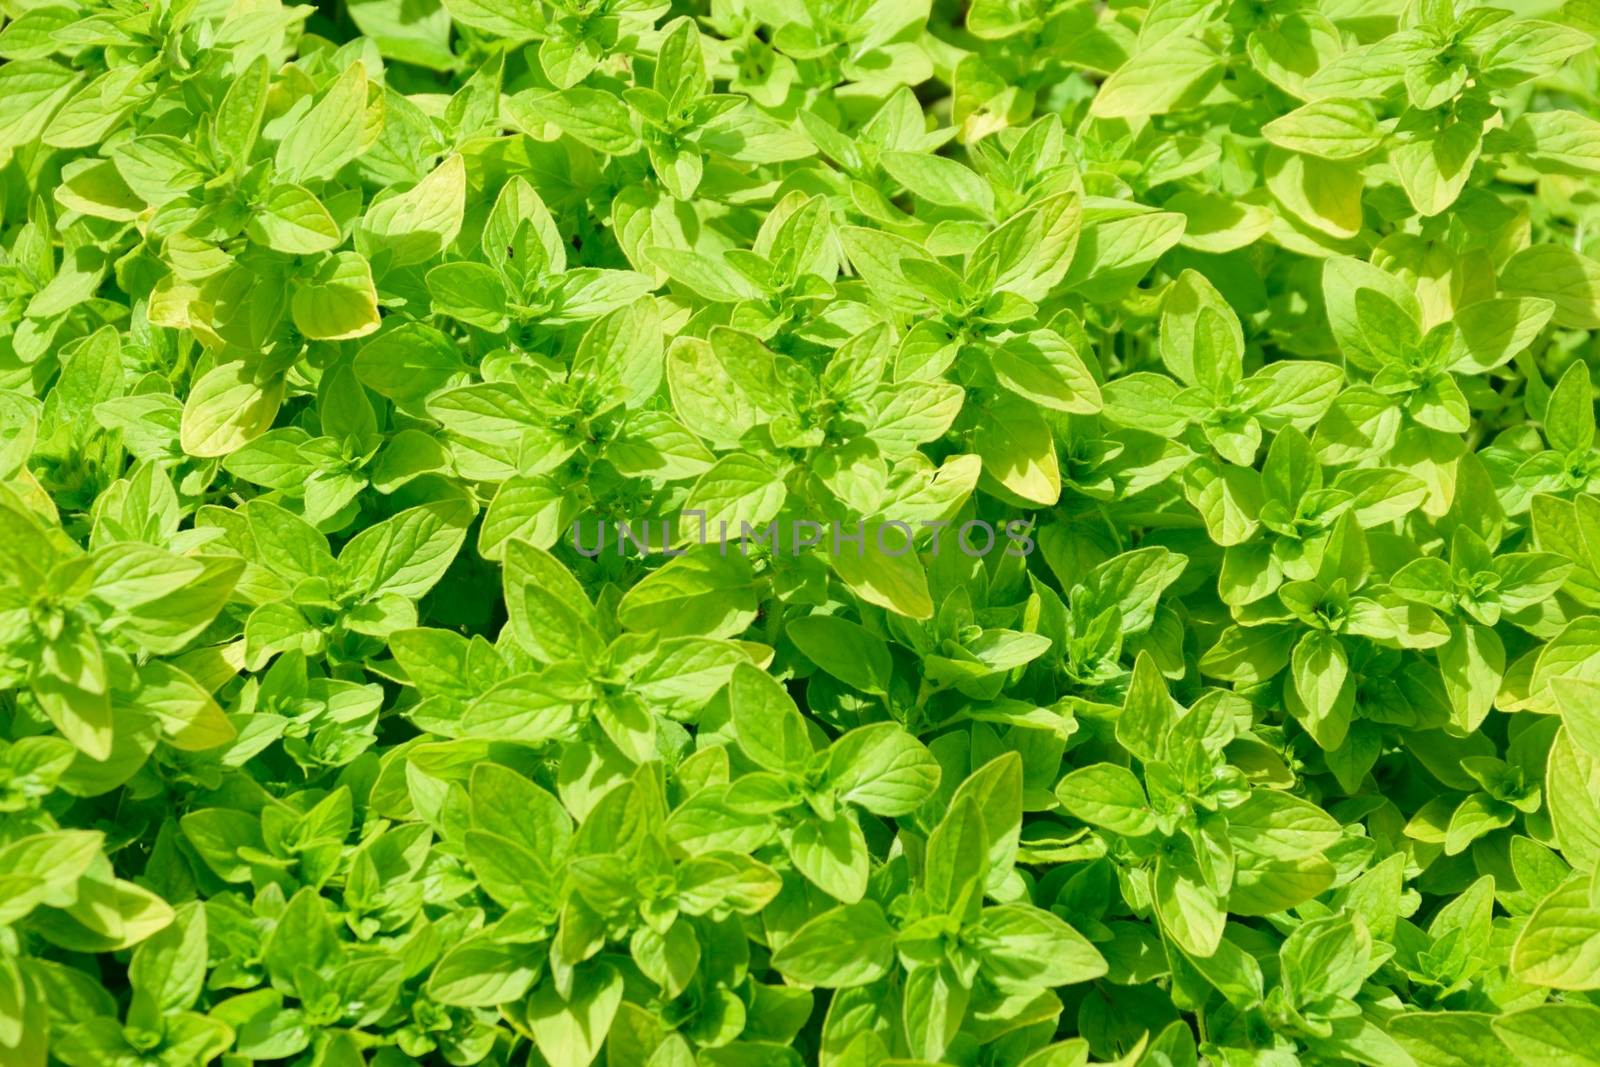 Small bright green leaves